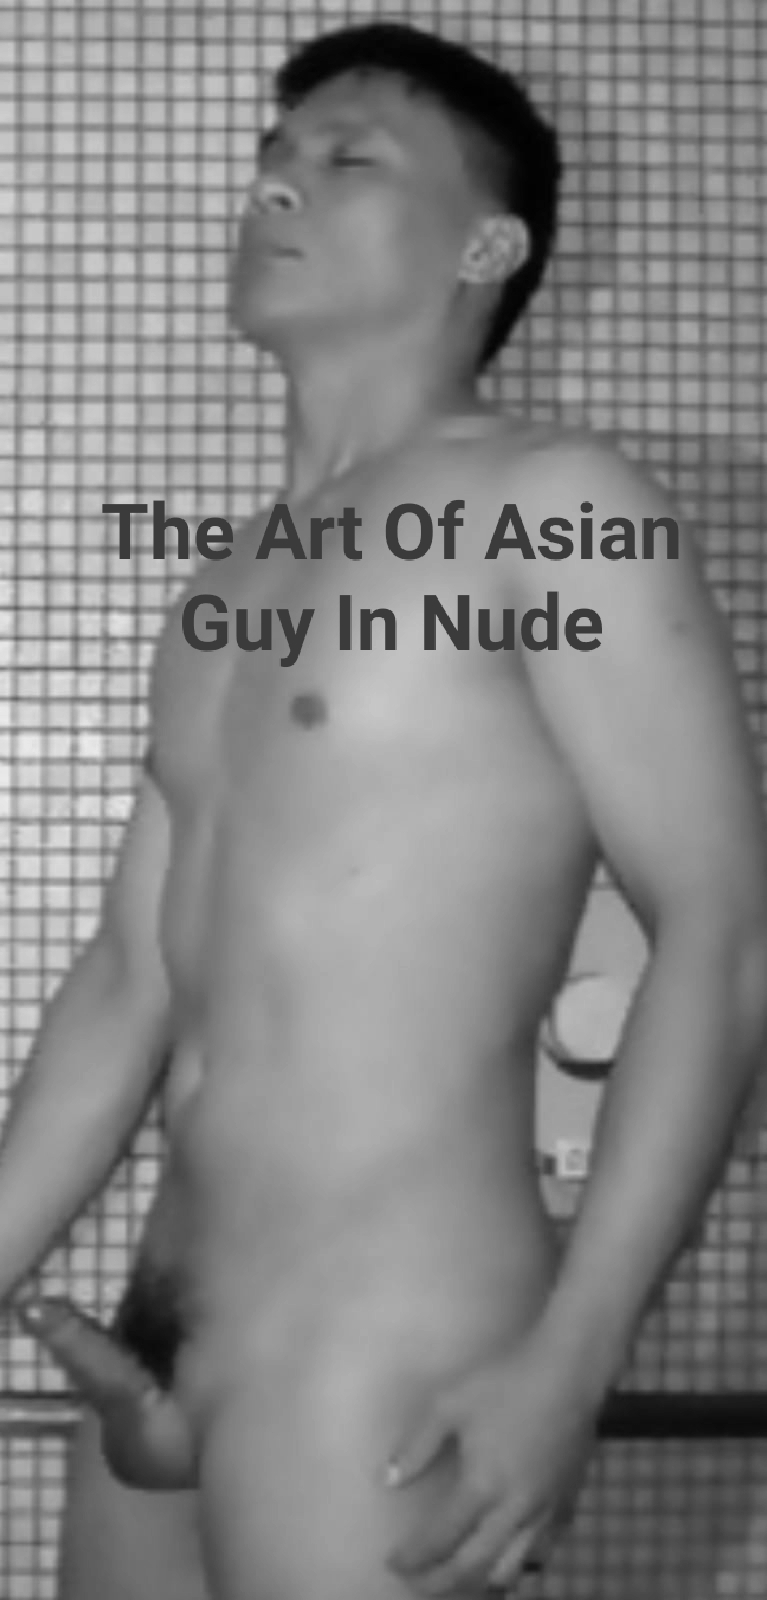 Asian Chinese Gay Enjoyed Being Naked (Cock And Ball Torture)